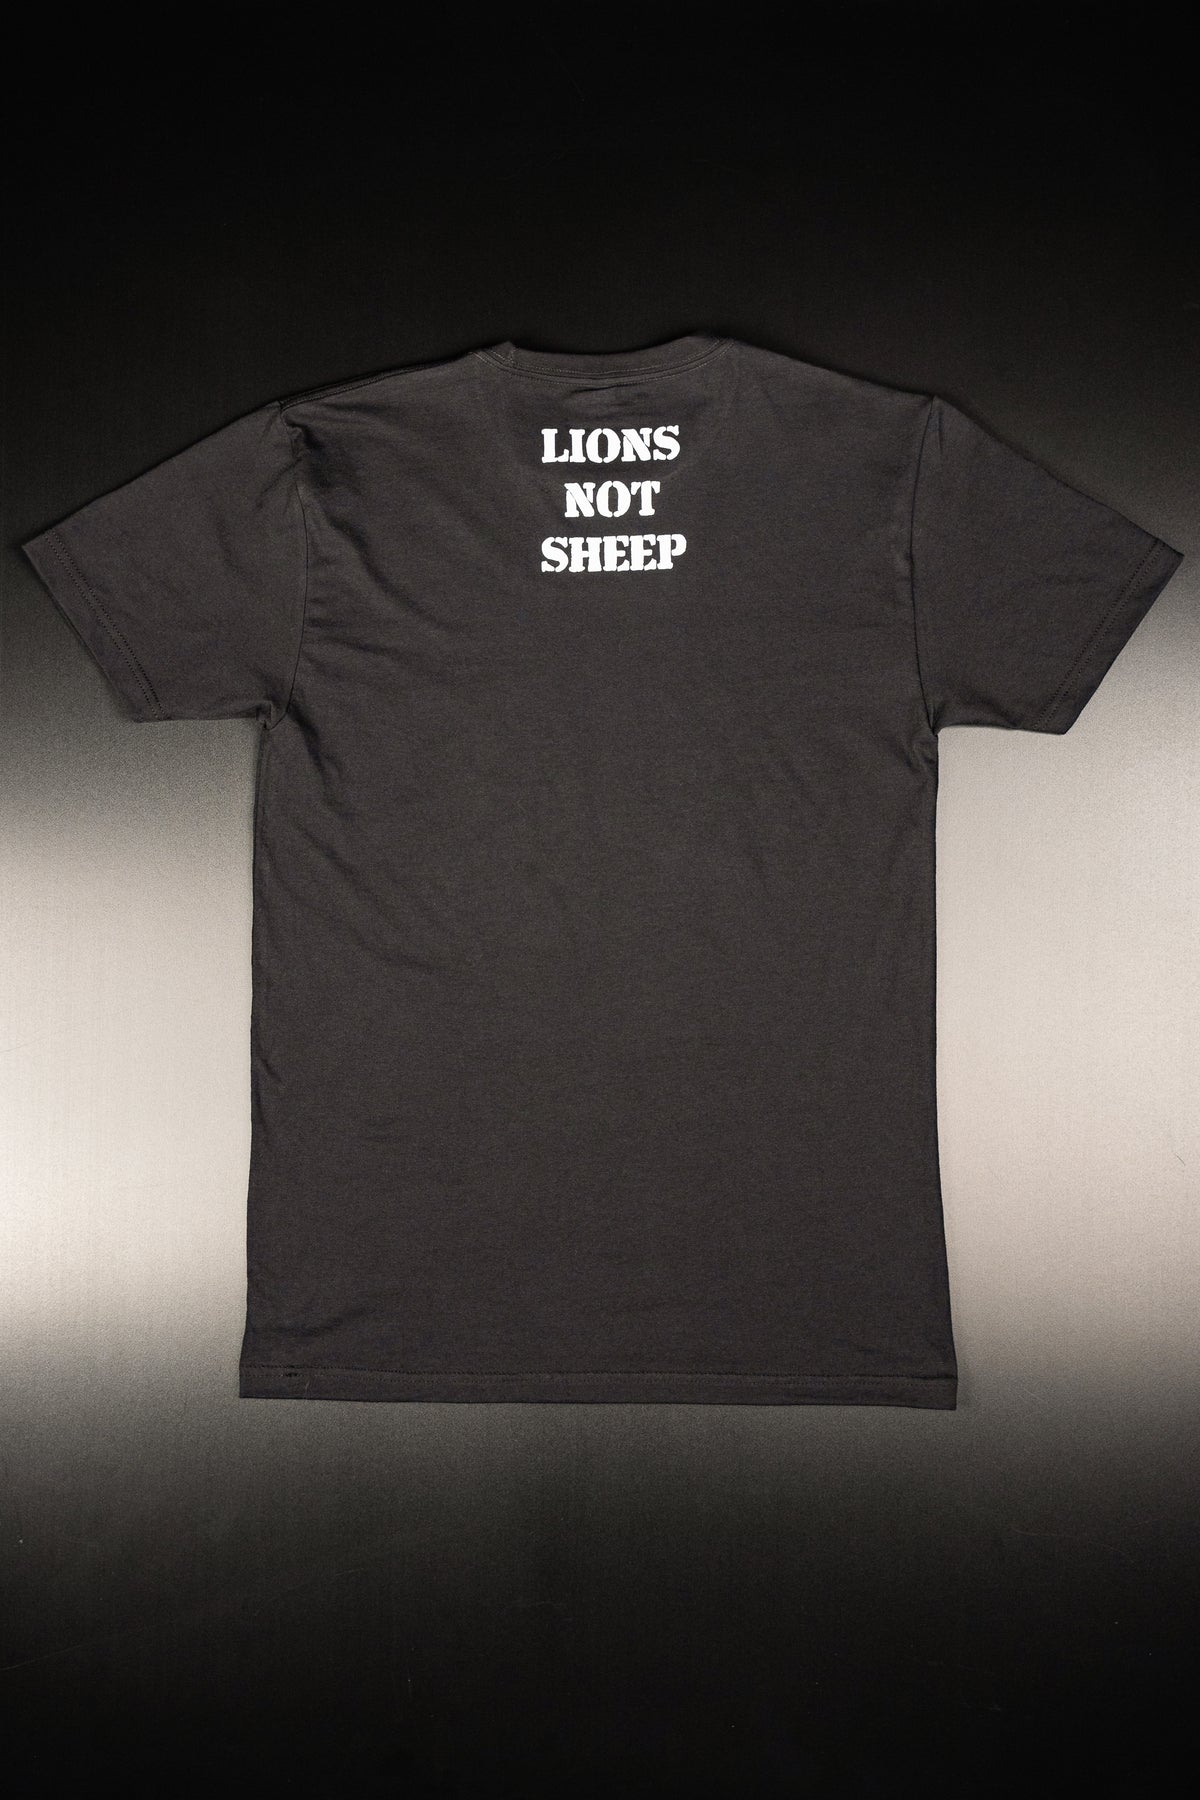 Lions Not Sheep &quot;Lead From the Front&quot; Tee (White or Black)